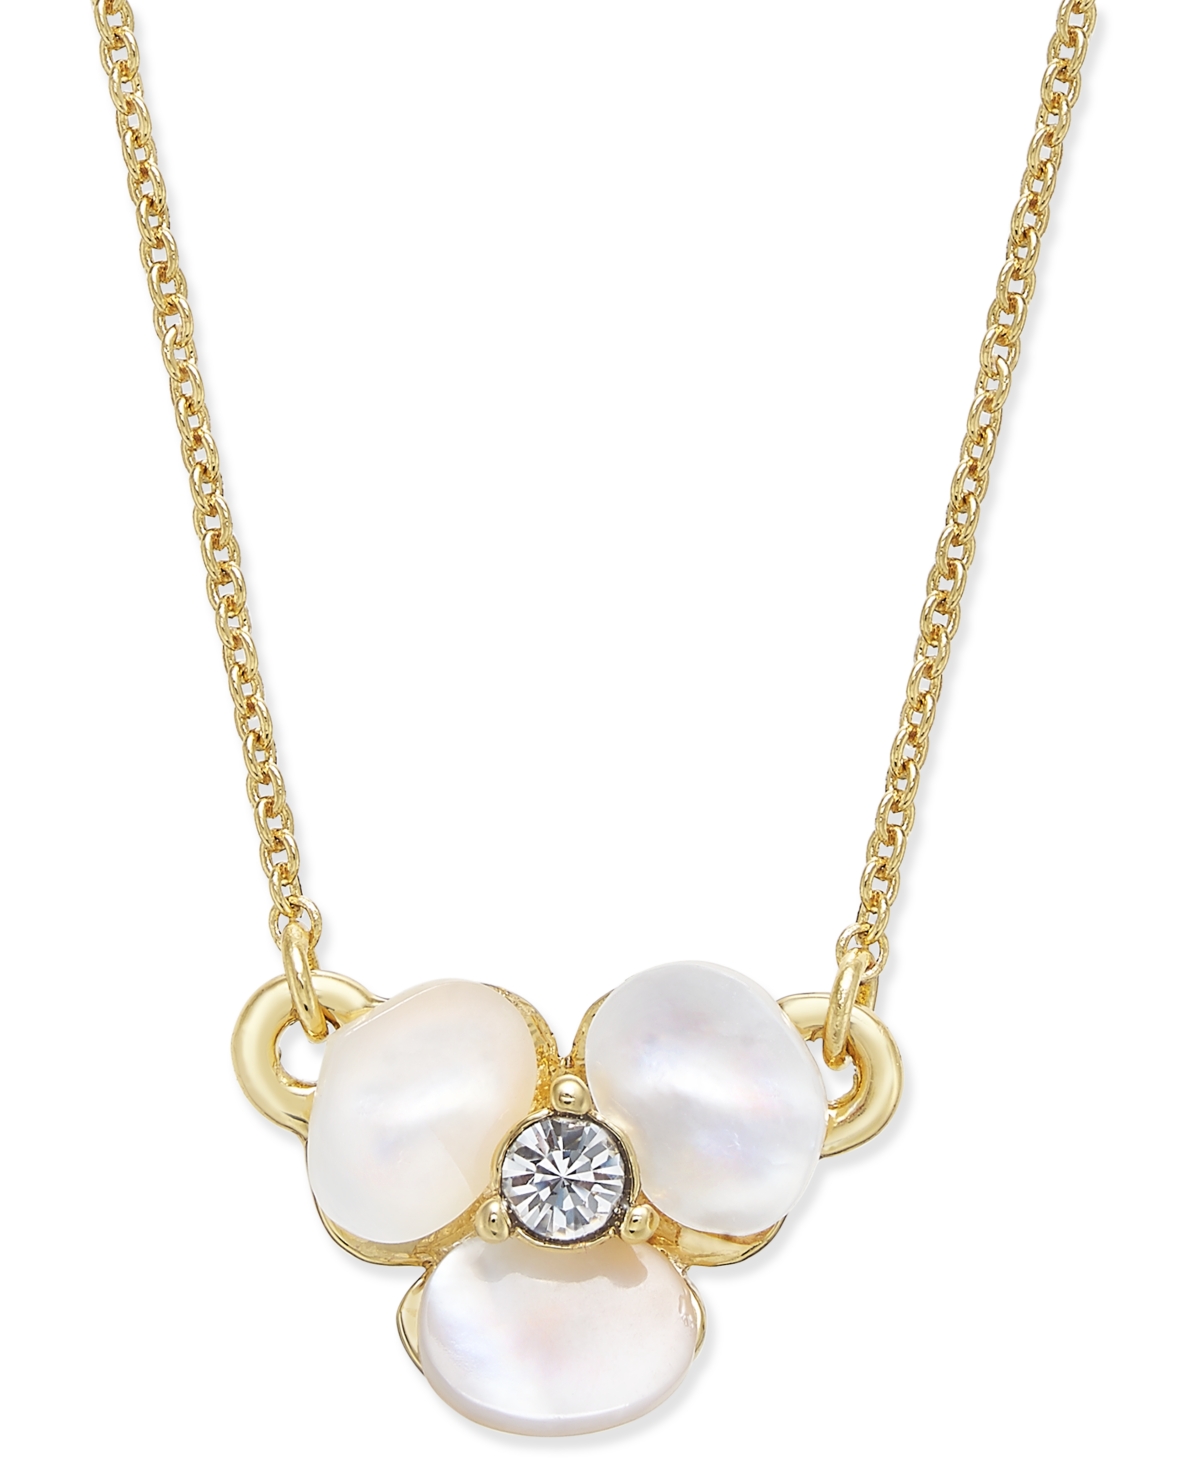 Gold-Tone Pave & Mother-of-Pearl Flower Pendant Necklace - Cream